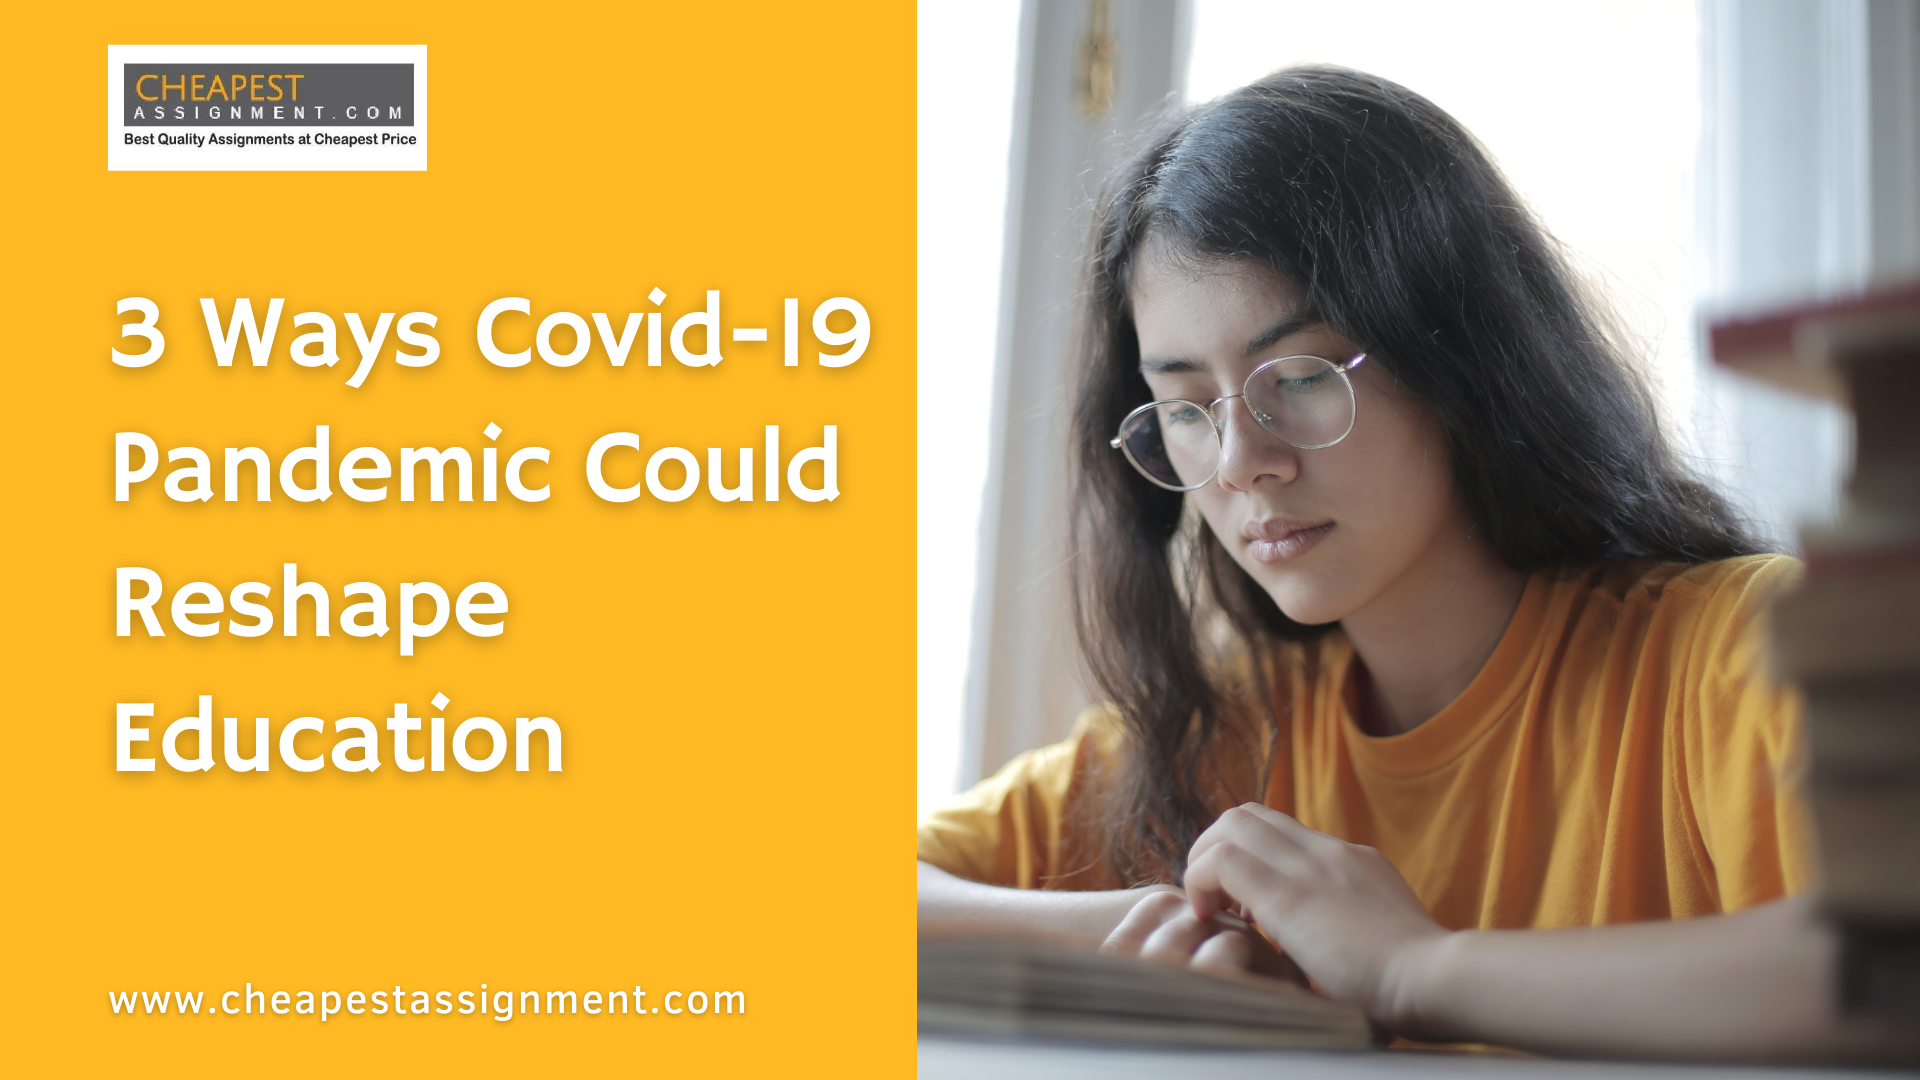 3 Ways Covid-19 Pandemic Could Reshape Education